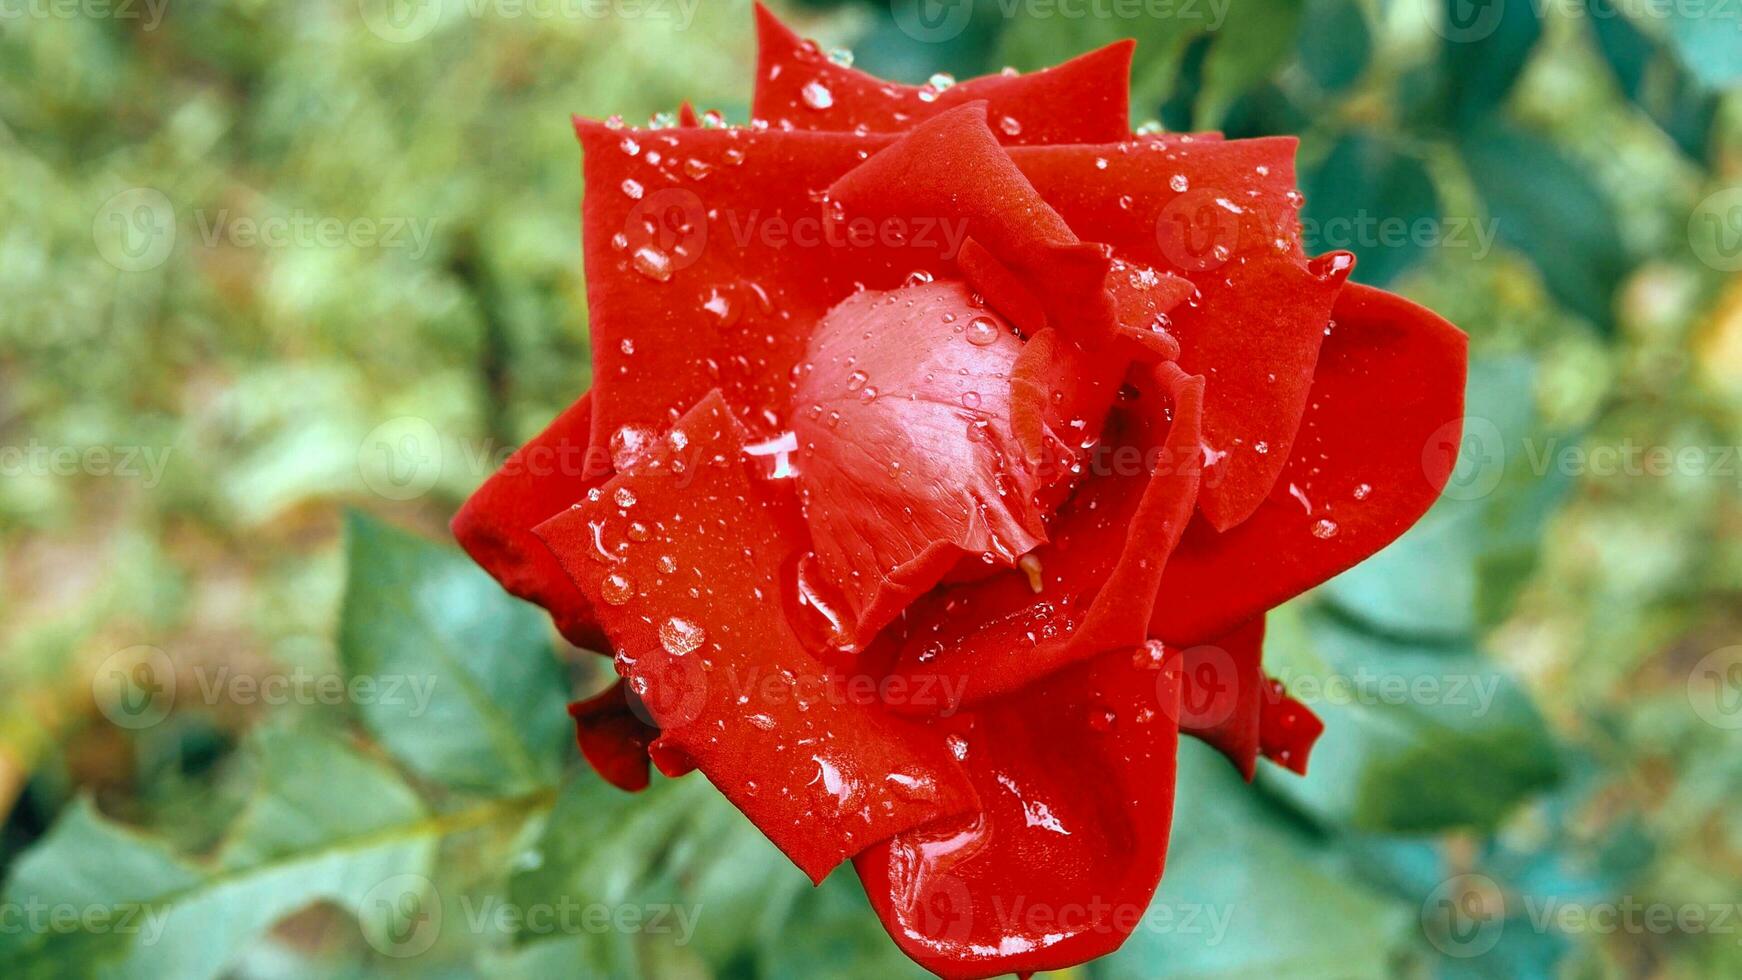 Close-up of Beautiful bright one red rose in dew drops after rain in the spring garden outdoors and green leaf blur in background photo